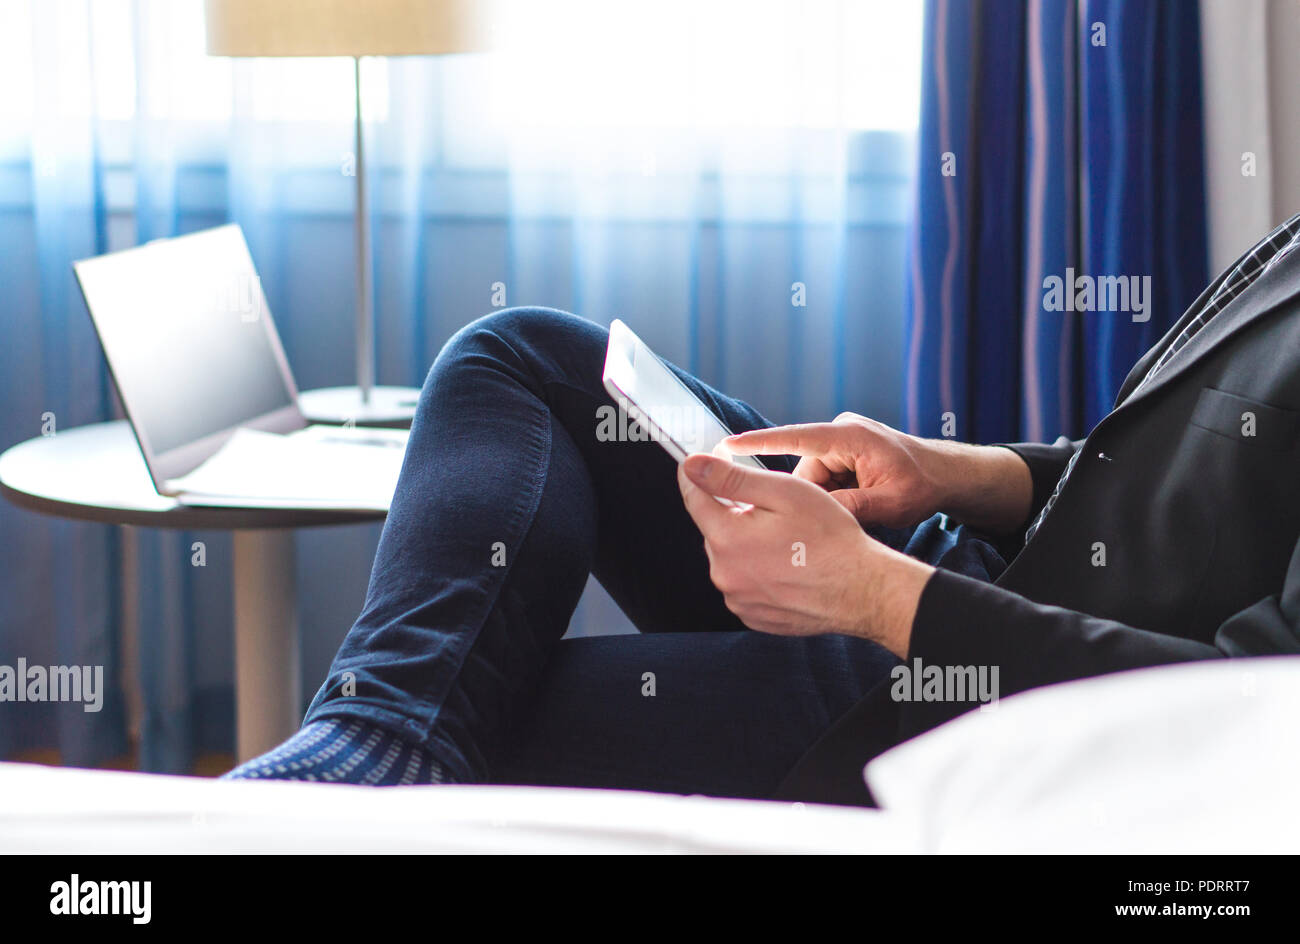 Business man reading news or email with tablet in hotel room. Businessman using smart mobile device and relaxing. Stock Photo